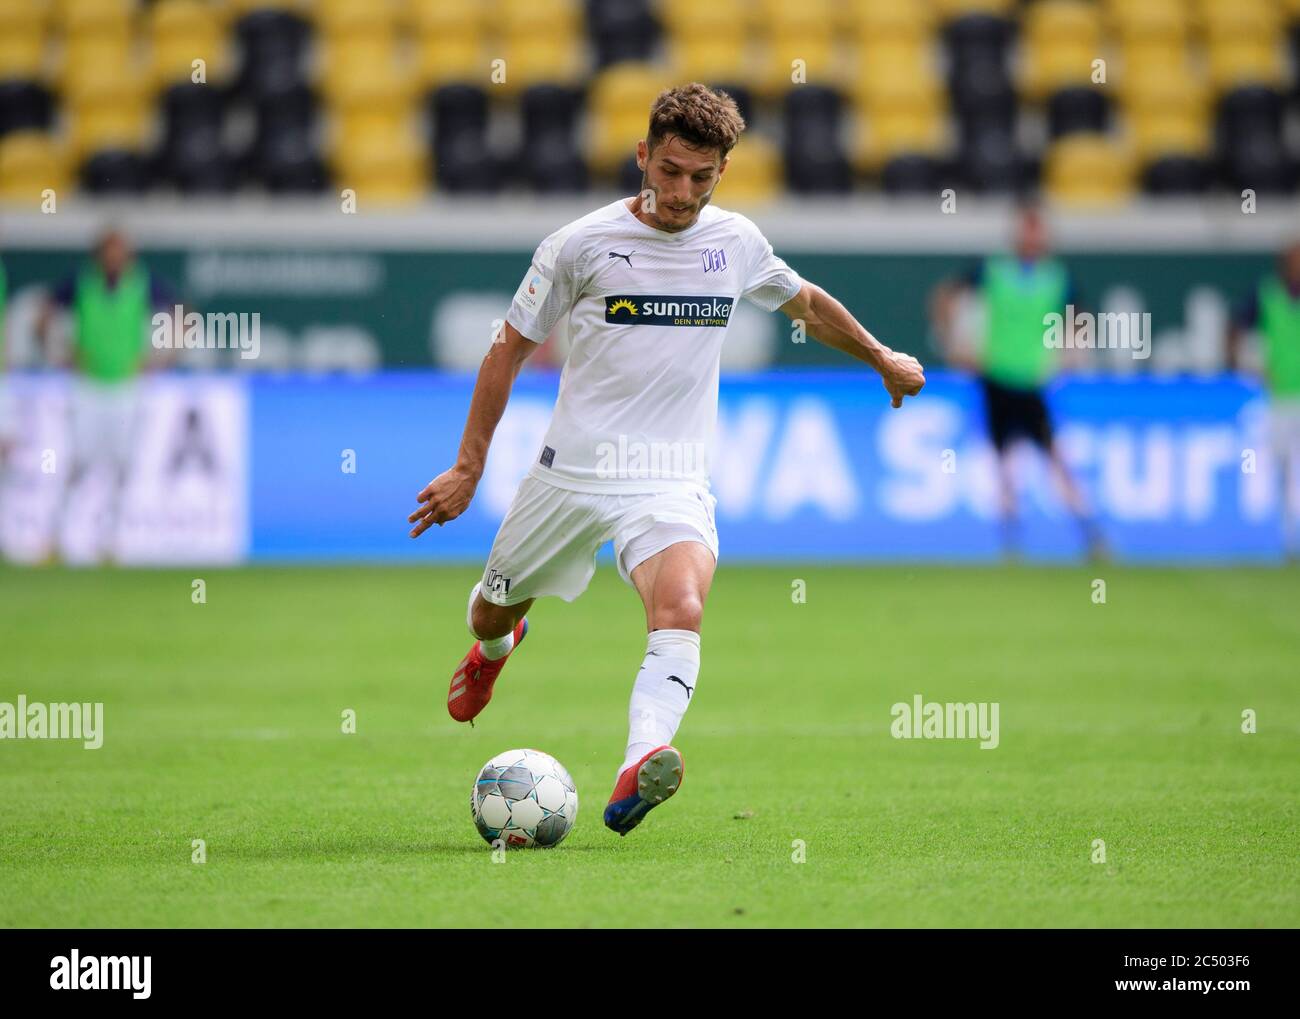 Dresden, Germany. 28th June, 2020. Football: 2nd Bundesliga, SG Dynamo Dresden - VfL Osnabrück, 34th matchday, at the Rudolf Harbig Stadium. Osnabrück's Bashkim Ajdini plays the ball. Credit: Robert Michael/dpa-Zentralbild/dpa - IMPORTANT NOTE: In accordance with the regulations of the DFL Deutsche Fußball Liga and the DFB Deutscher Fußball-Bund, it is prohibited to exploit or have exploited in the stadium and/or from the game taken photographs in the form of sequence images and/or video-like photo series./dpa/Alamy Live News Stock Photo